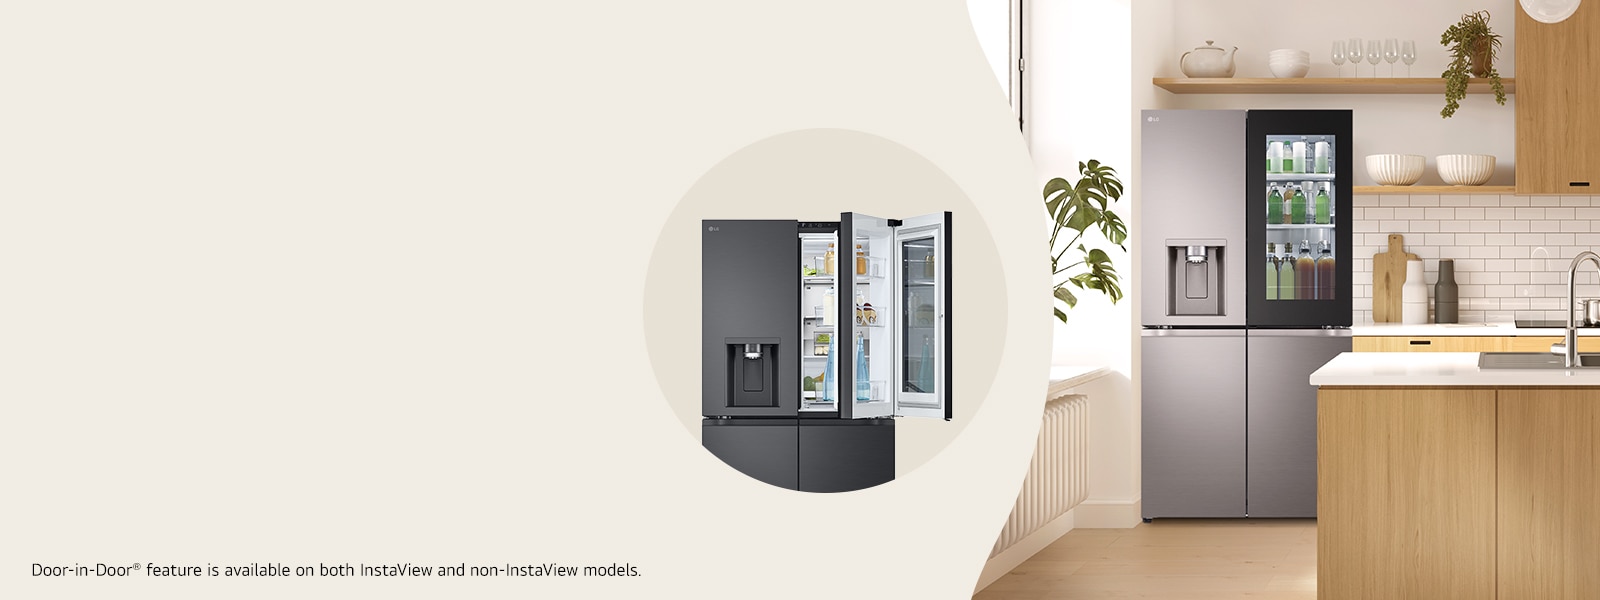 LG Door-in-Door® Fridges Raide the fridge without losing your cool An easy access compartment allows you to quickly get your hands on frequently used items, without opening the full door, reducing the amount of cold air that escapes. Door-in-Door® feature is available in both InstaView and non-InstaView models.